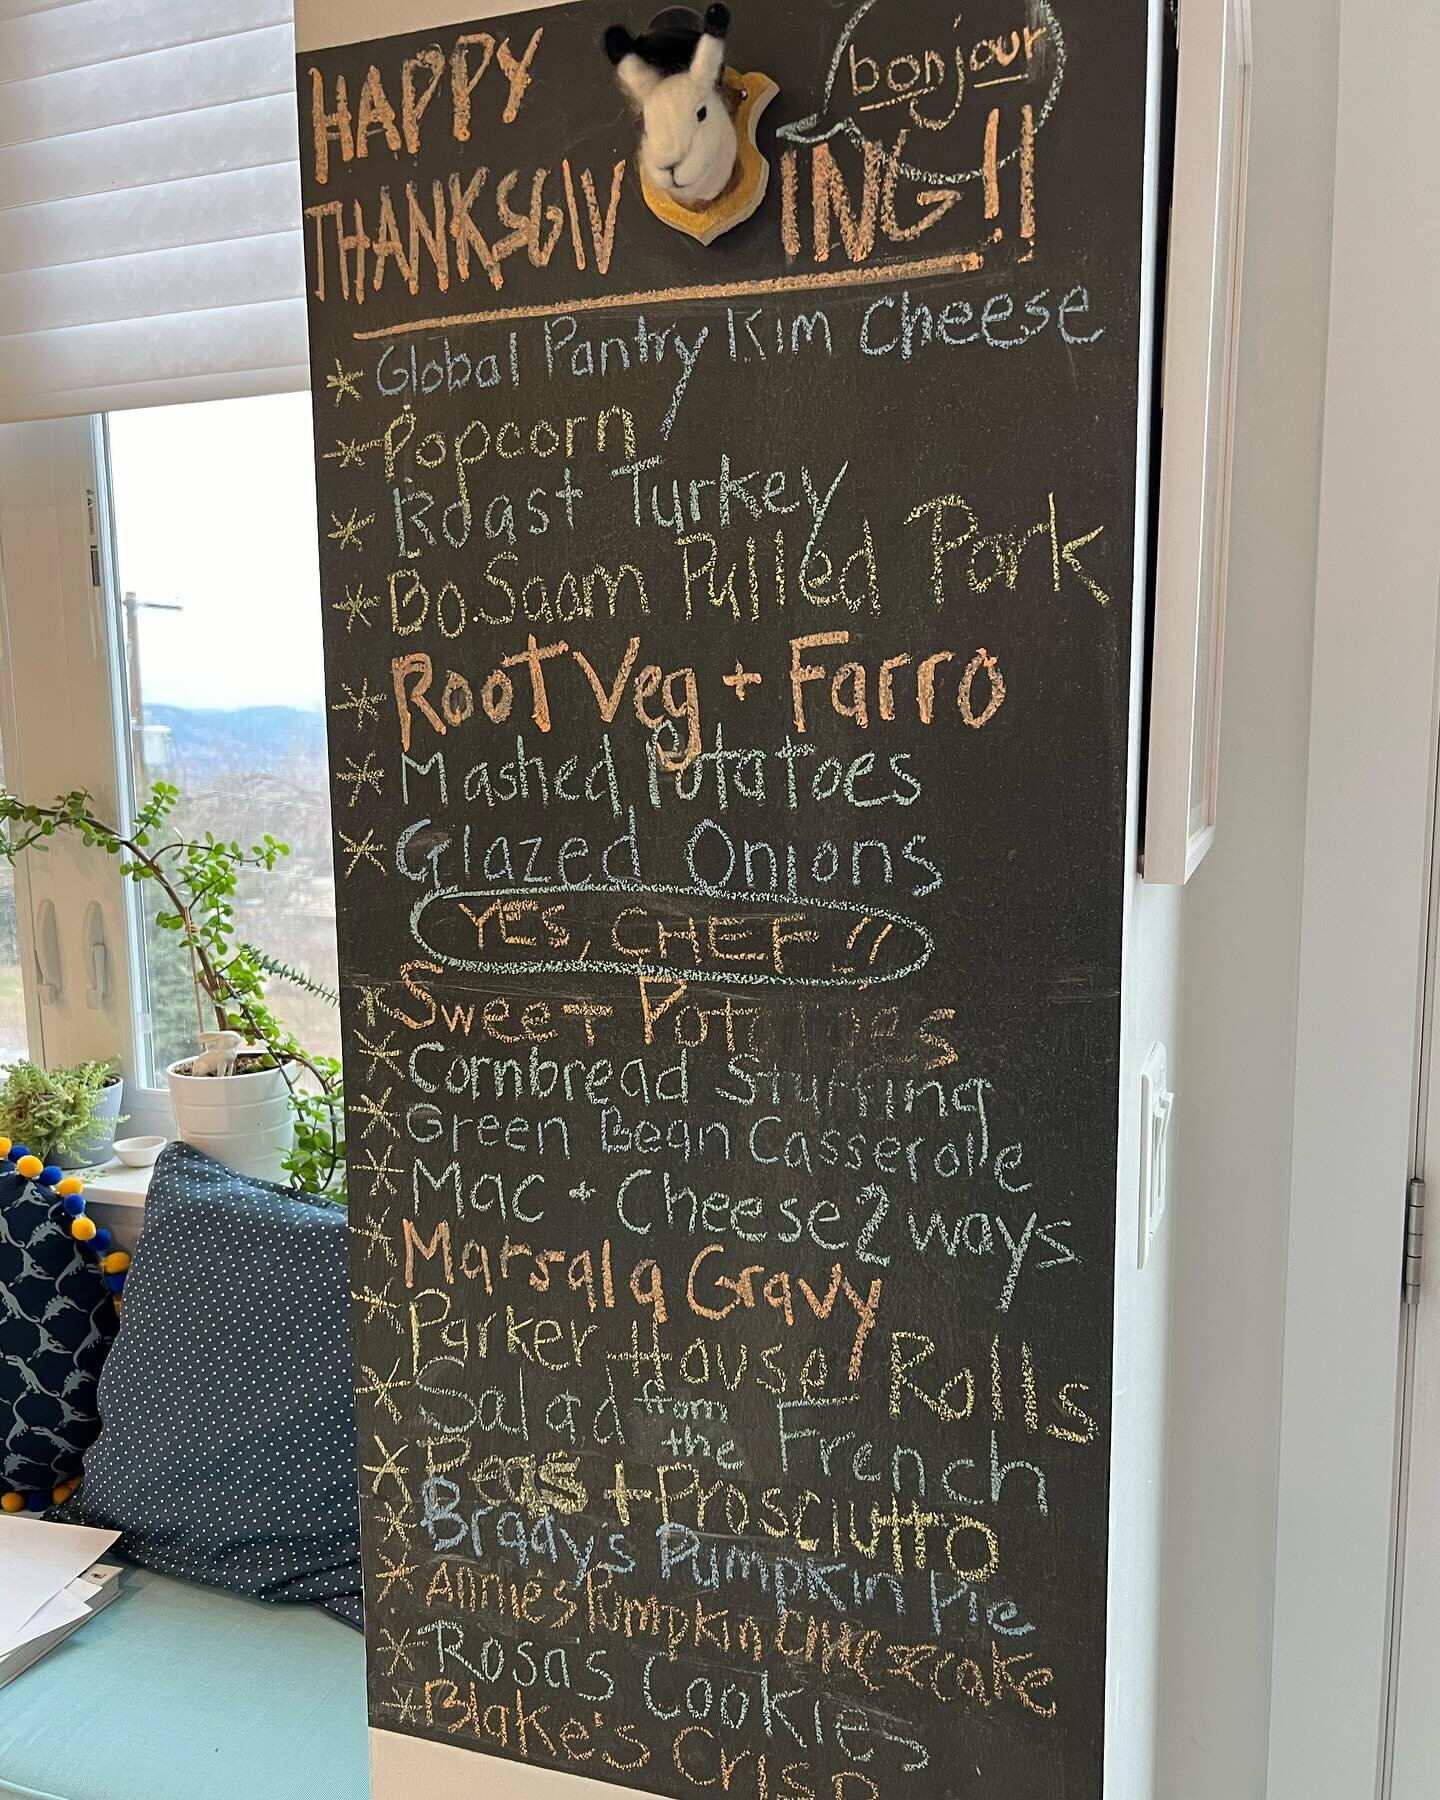 Thanksgiving for 40 (gulp) with a slight Global Pantry touch. Happy Thanksgiving because Lord unlike many in the world we have so much to be thankful for, first of all friends and family. #thanksgiving #thanksgivingmenu